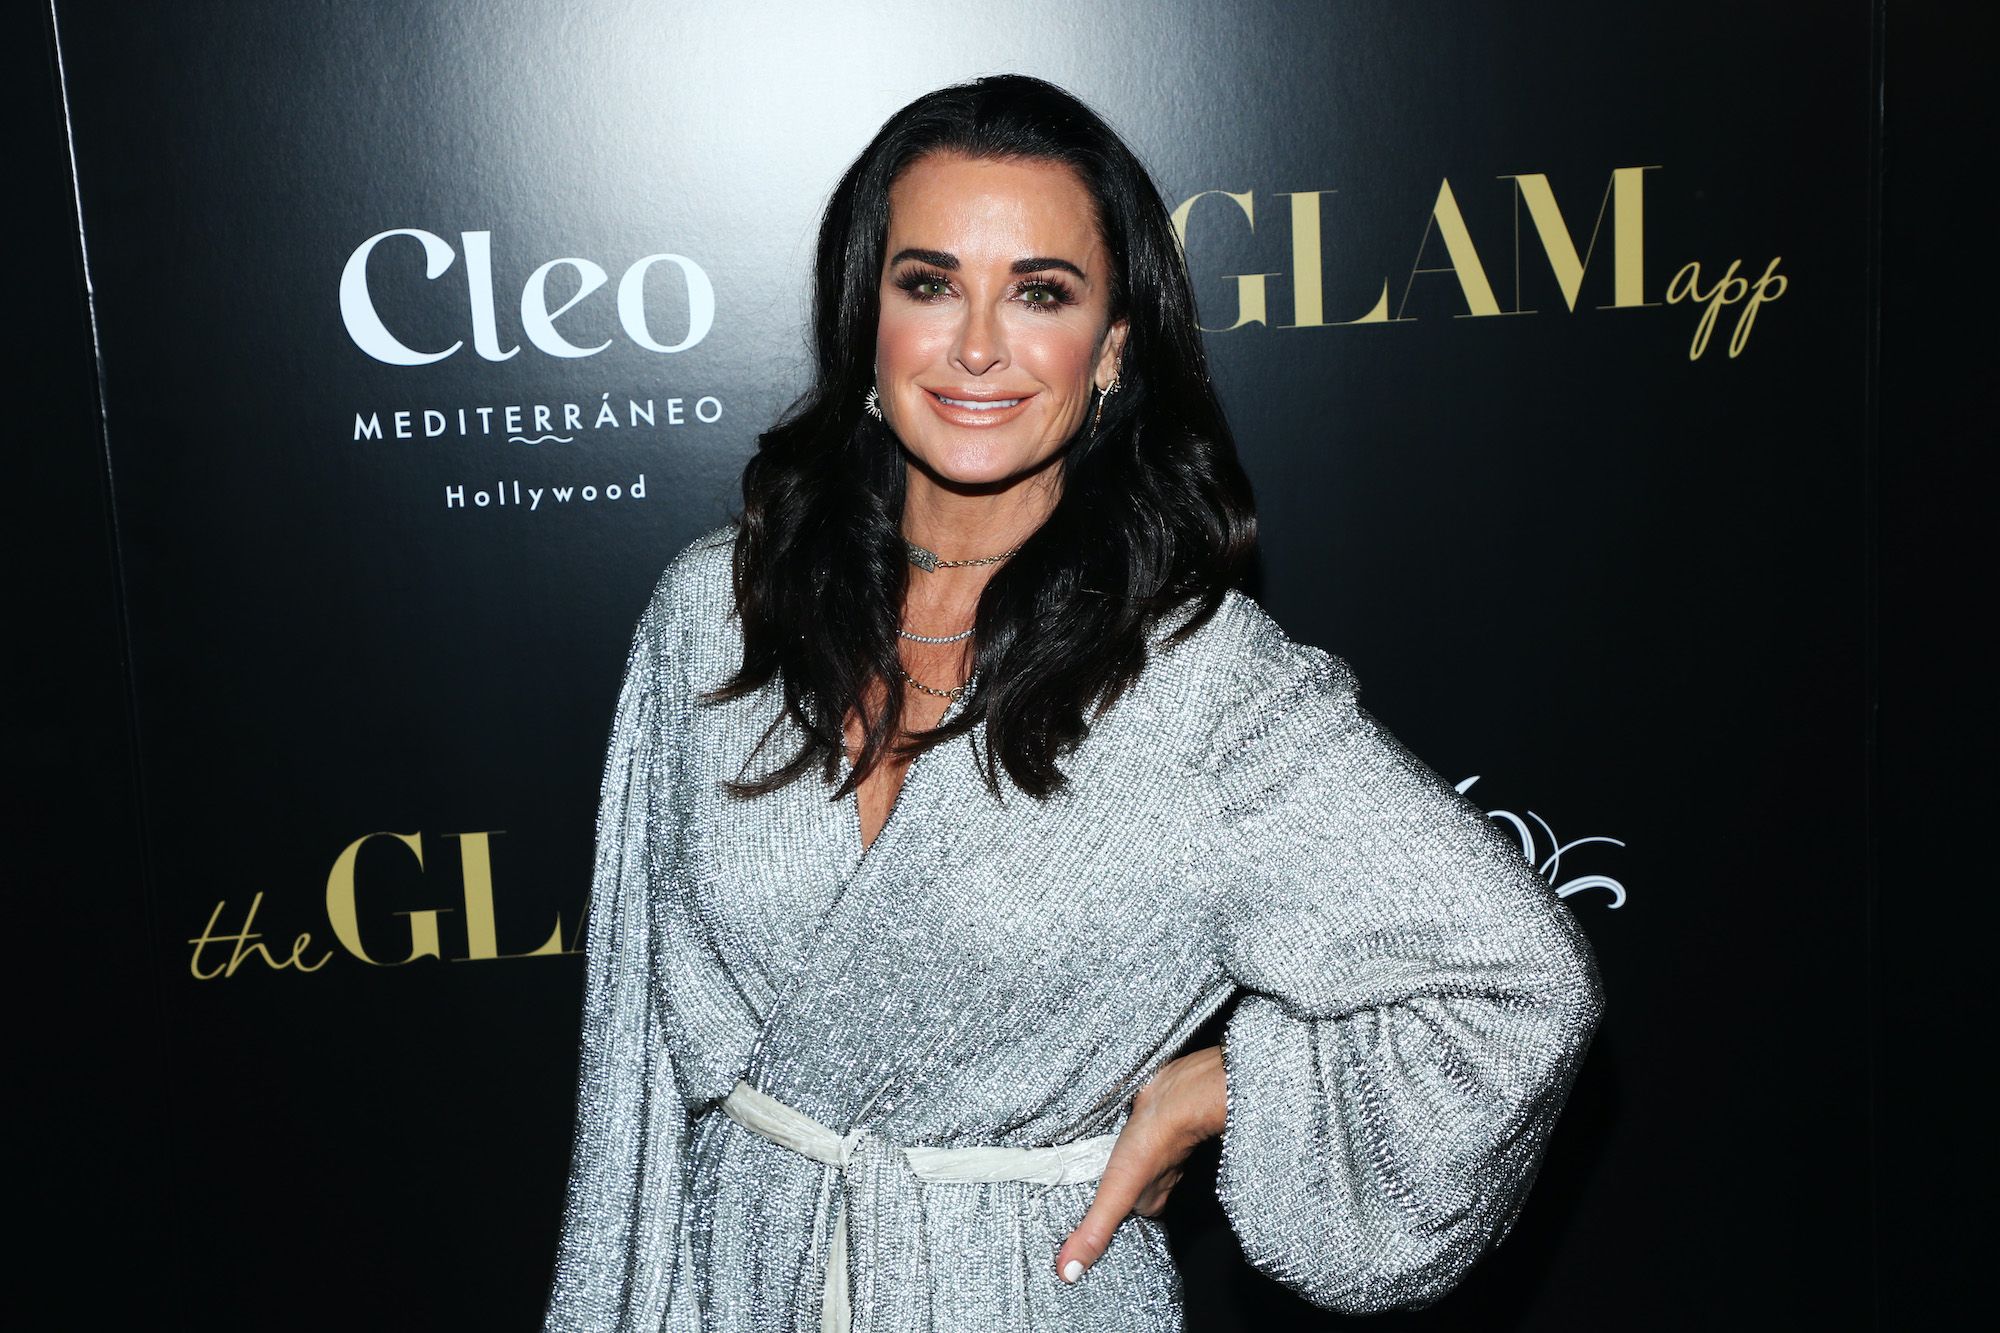 Kyle Richards smiling in front of a black background